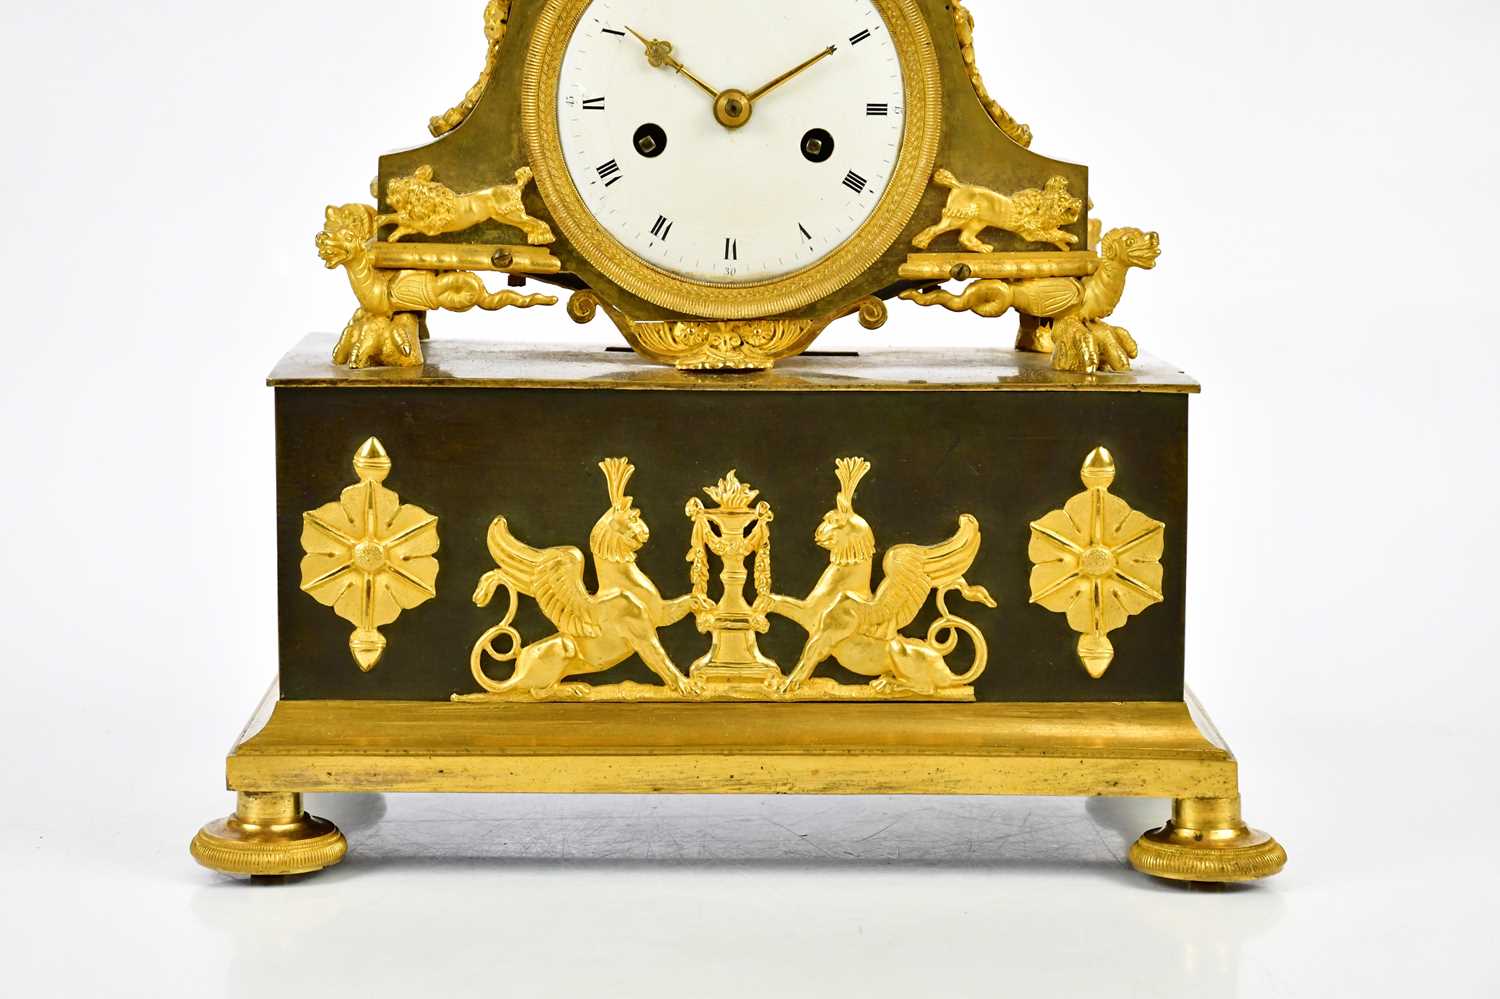 A late 19th century French ormolu mantel clock with cherubs supporting an urn finial above the - Image 4 of 7